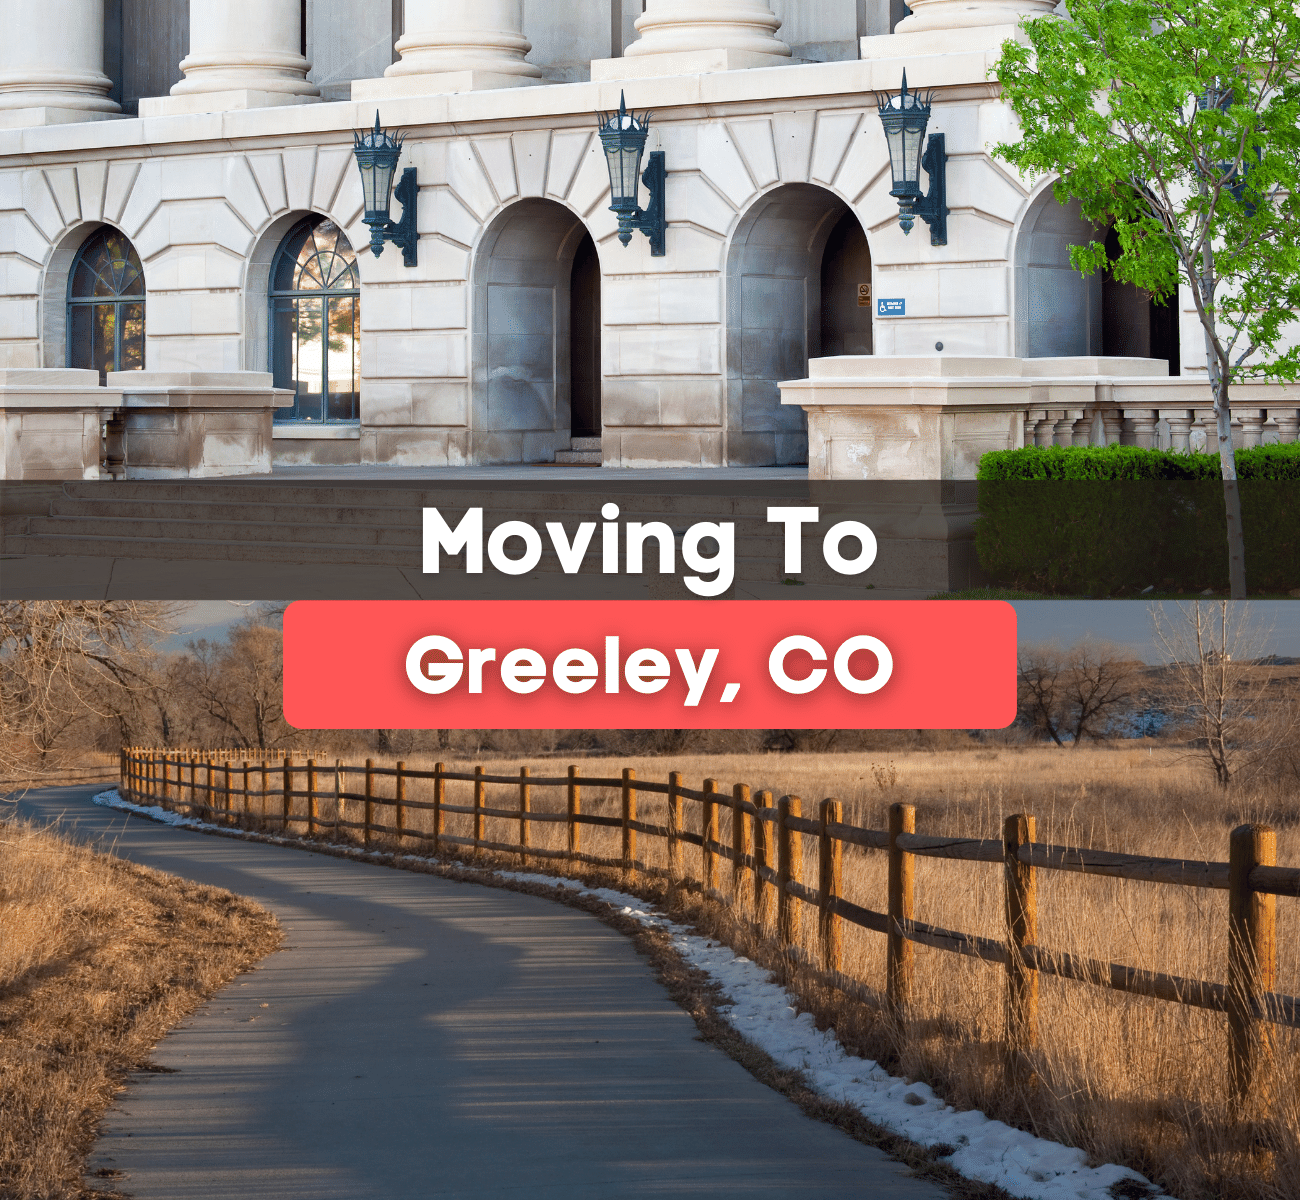 Moving to Greeley, Colorado - What is it like living in Greeley?